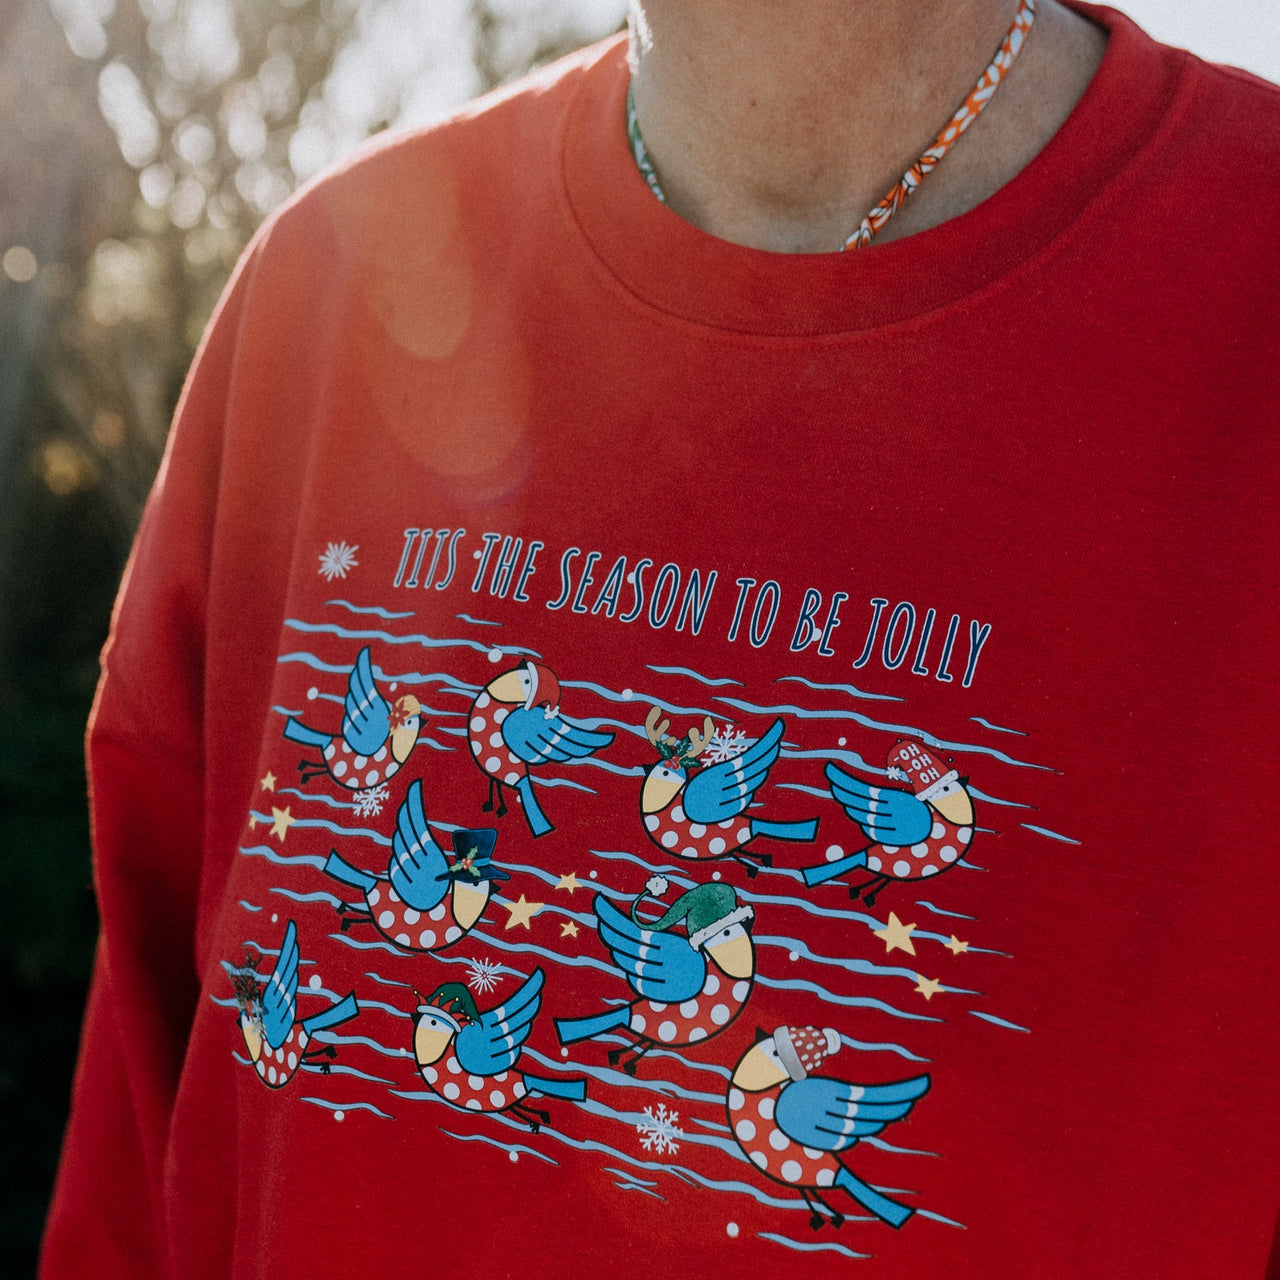 Bluetit Xmas Jumper in Red with slogan "Tits the Season to be Jolly"